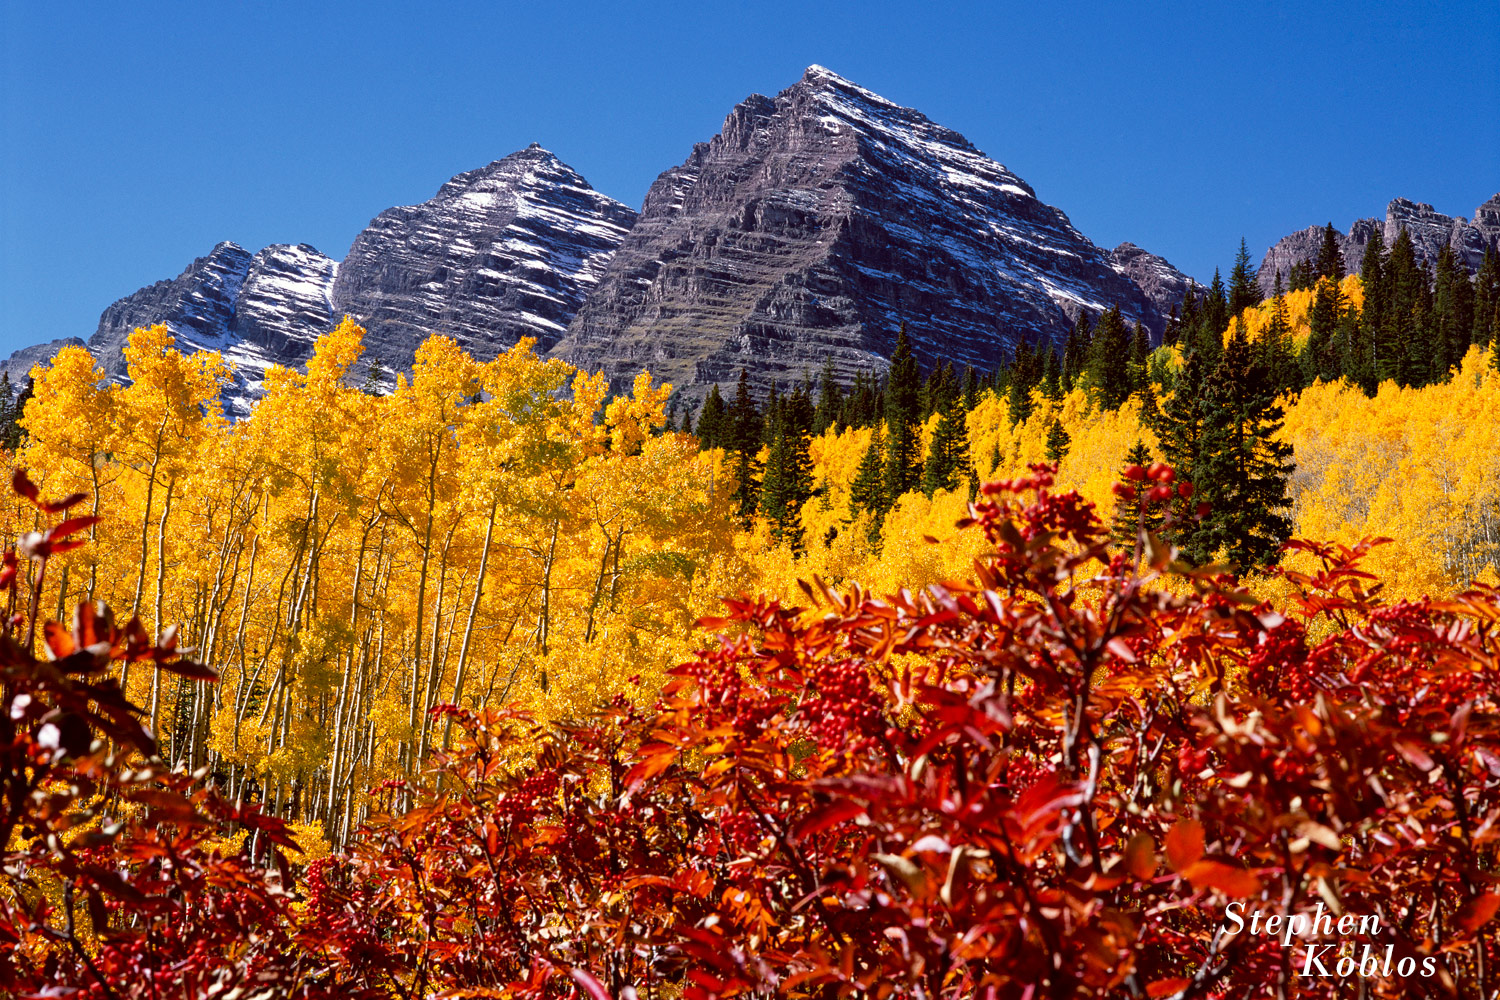 Maroon Bells over aspens and red berry bushes in the fall.